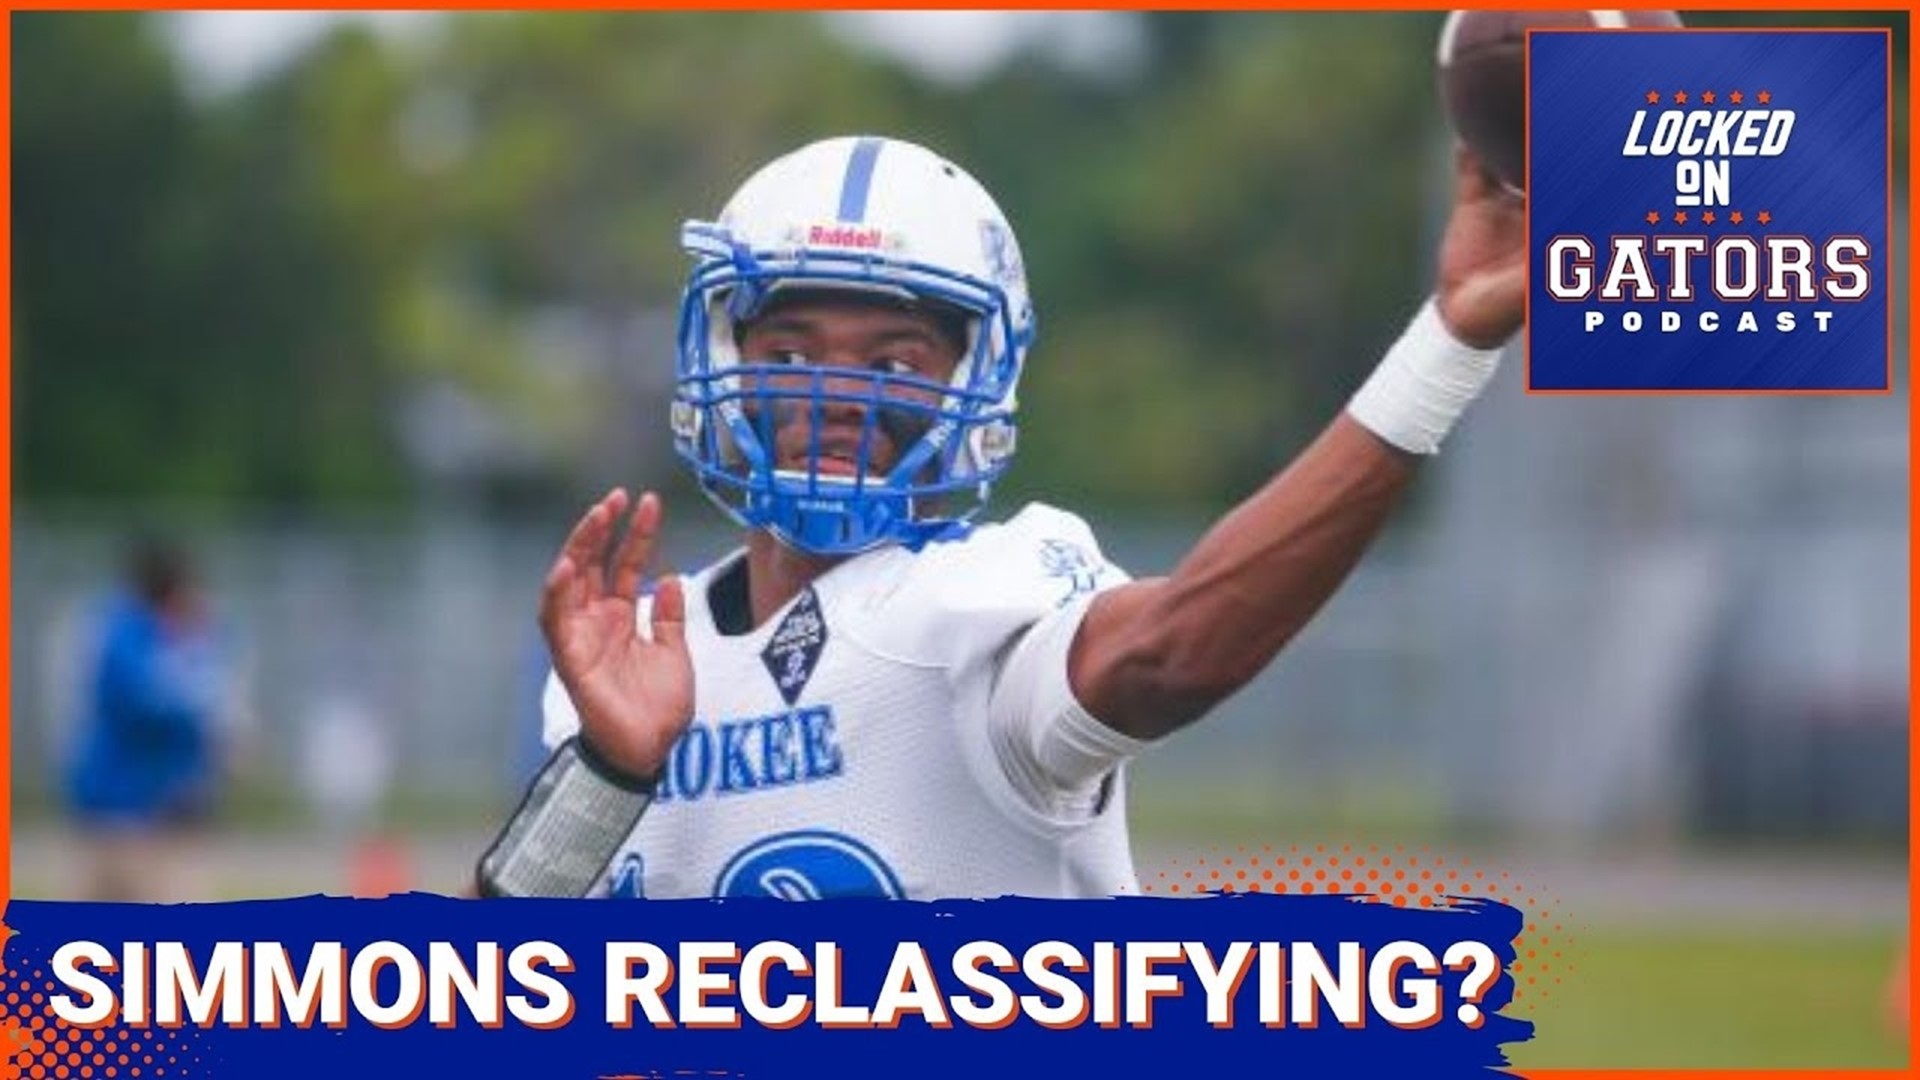 Could Billy Napier and this coaching staff convince 2025 Florida Gators commit Austin Simmons to reclassify to 2023 and join the Florida Gators immediately?